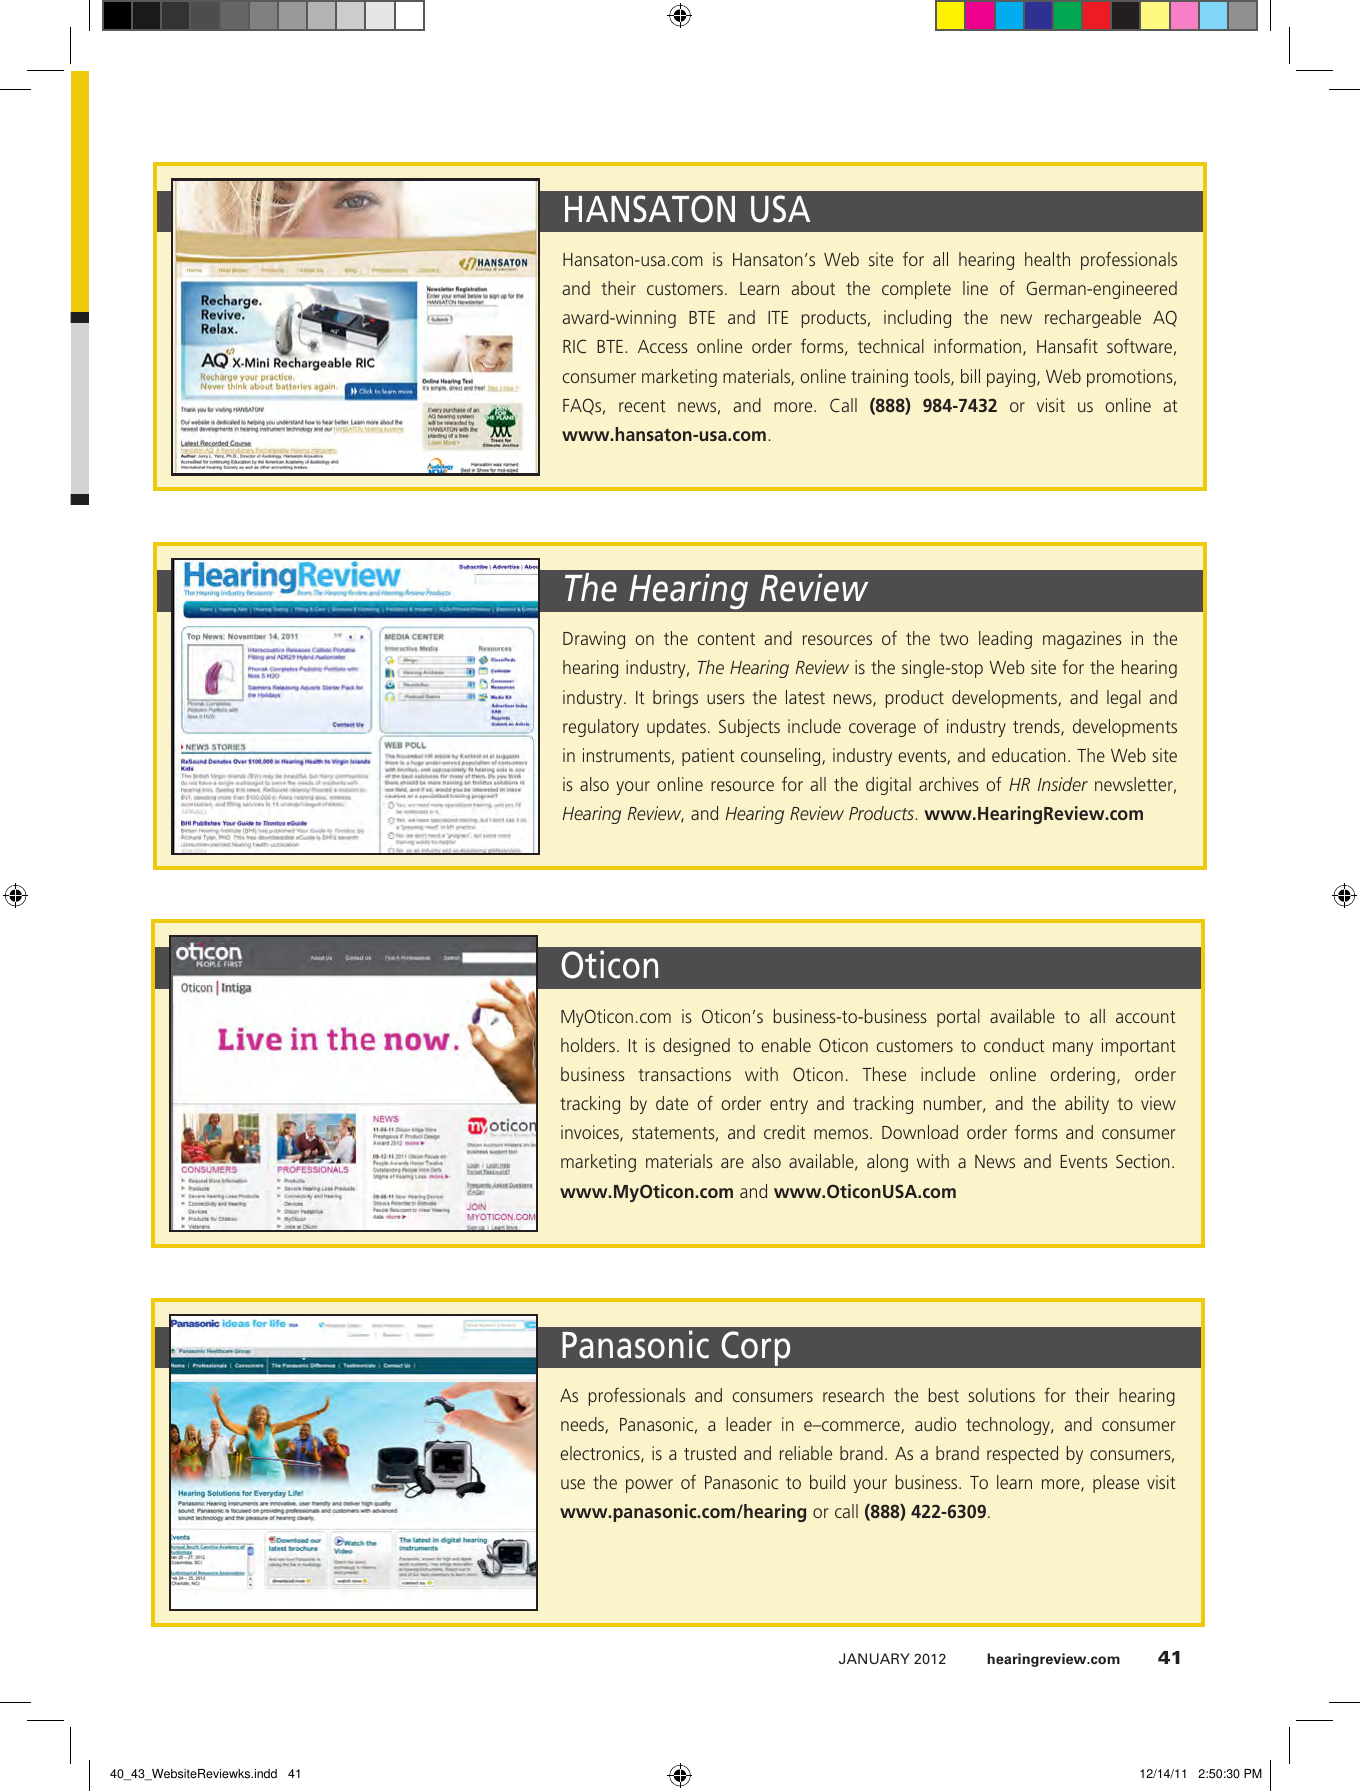 Page 2 of 4 - HR Website Review-2012